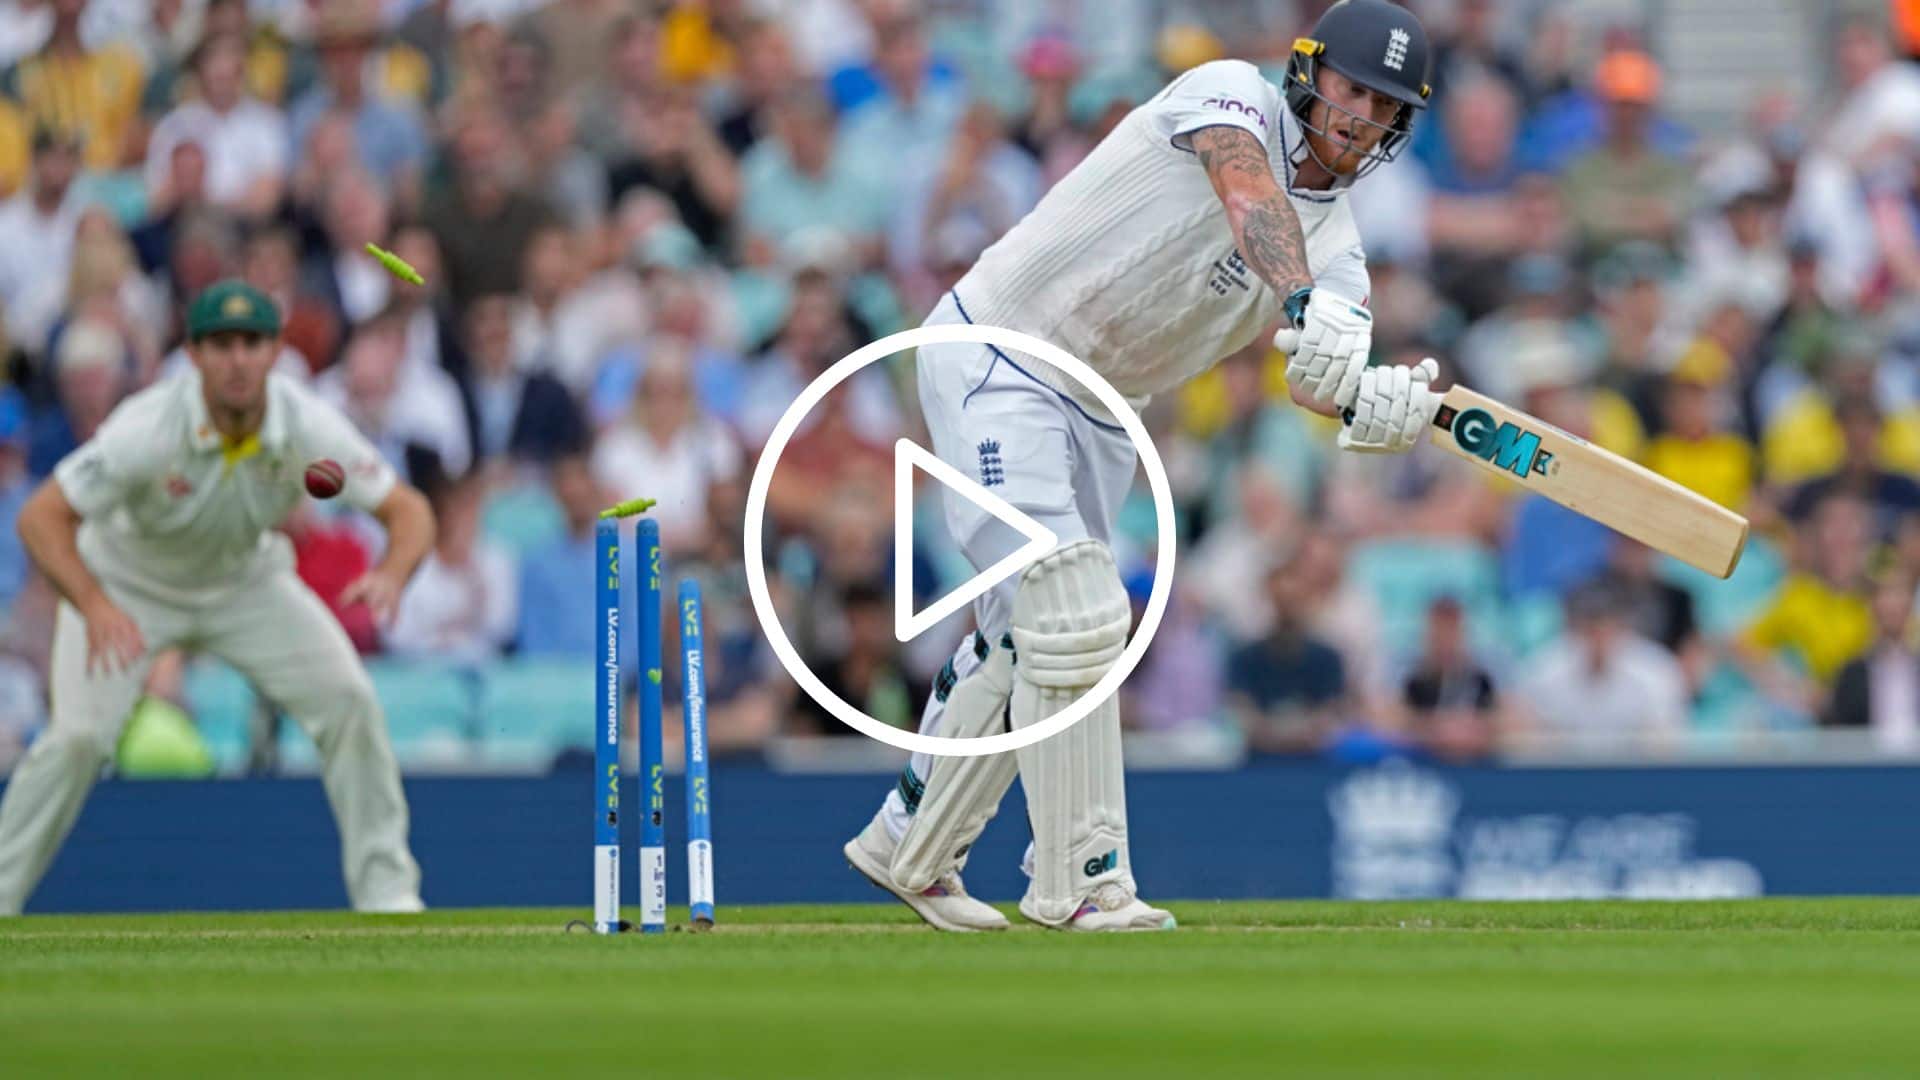 [Watch] Mitchell Starc Cleans Up Ben Stokes With An Absolute Cracker Of A Delivery